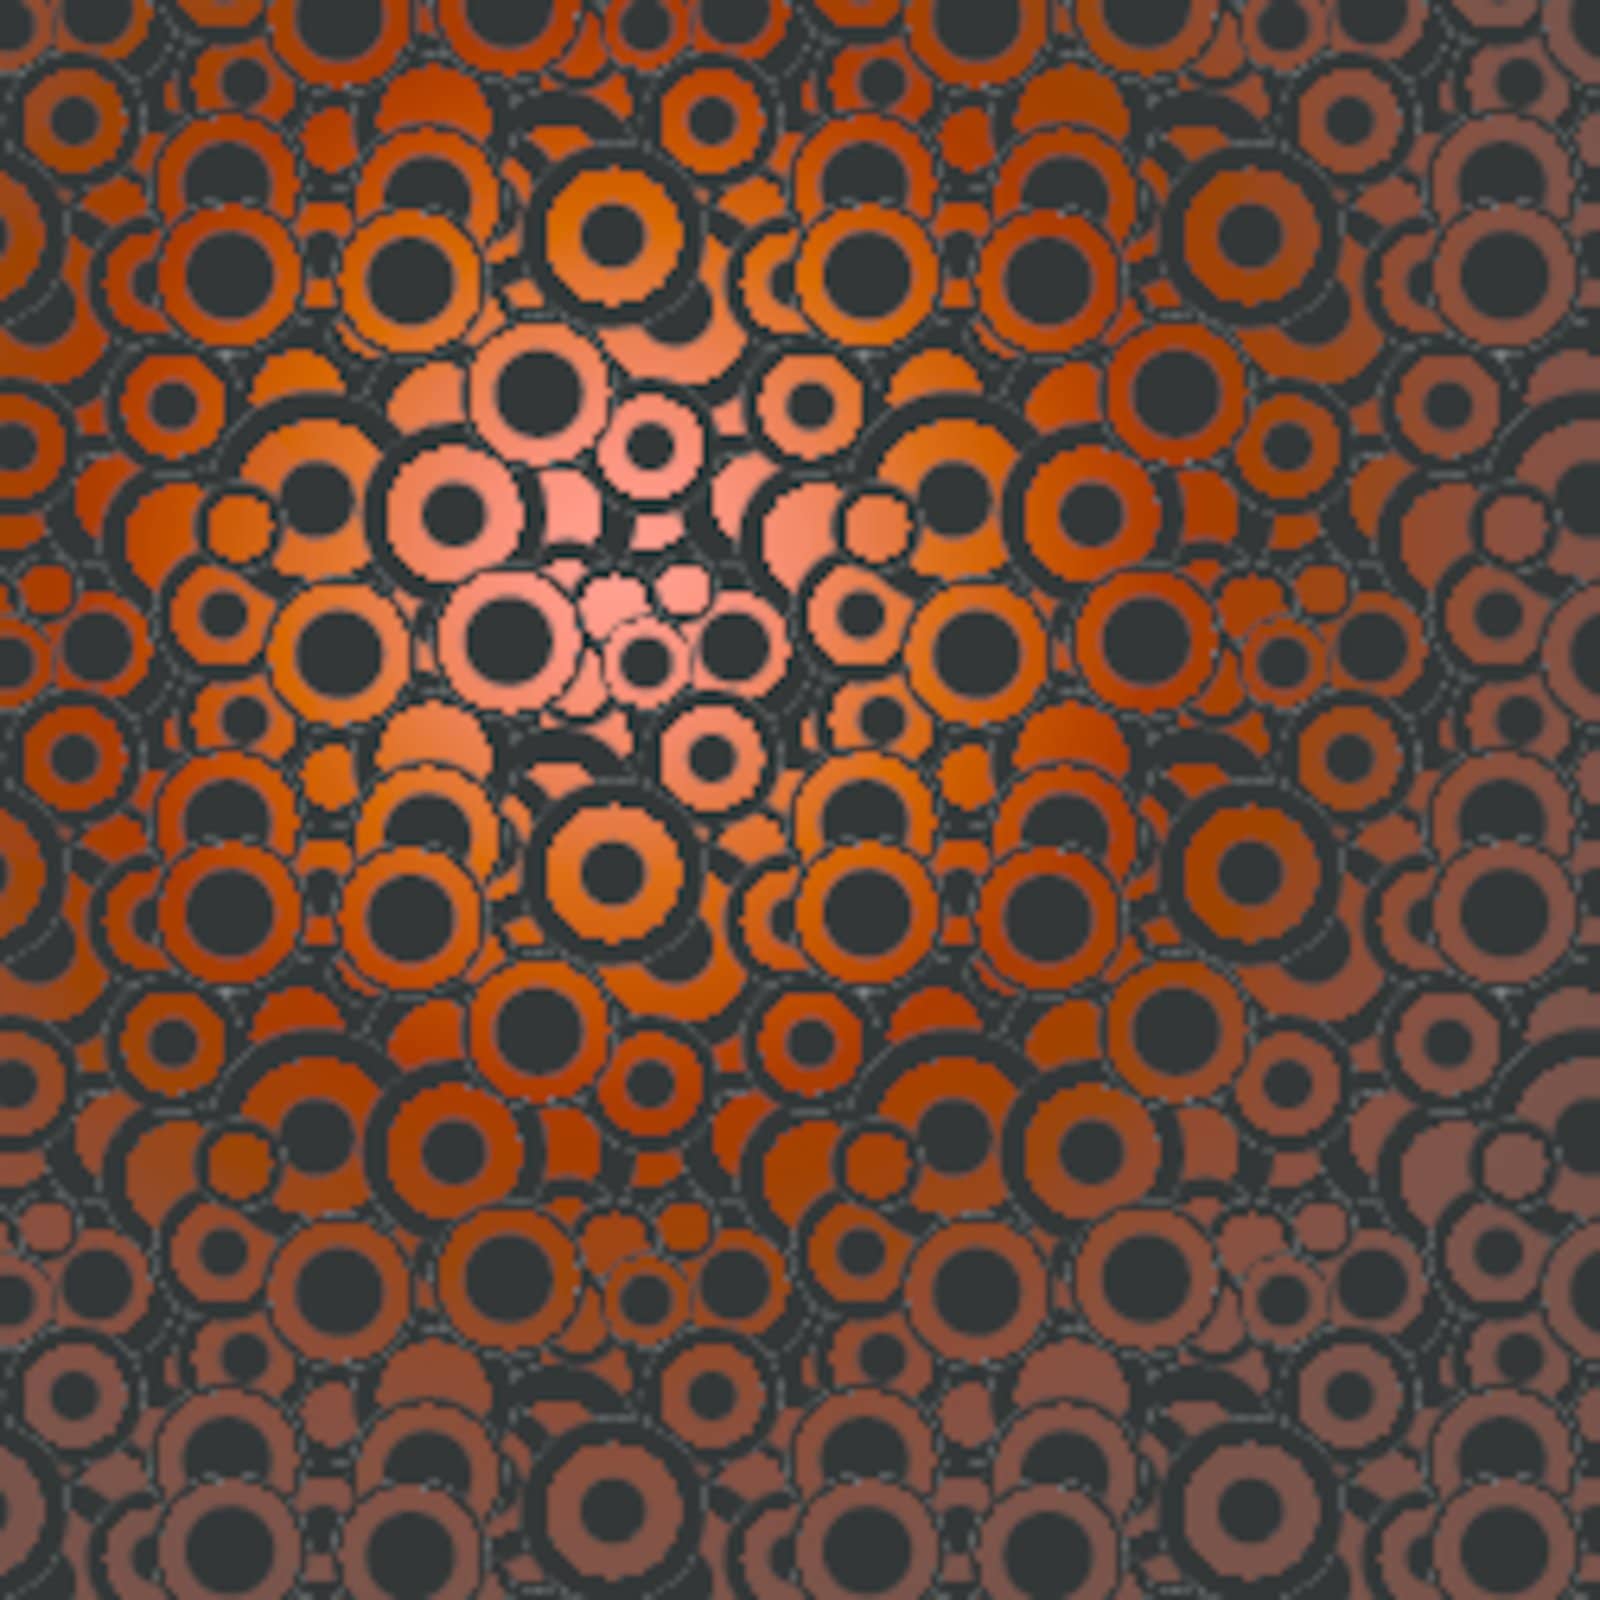 Lot of circles - red background / pattern / texture 